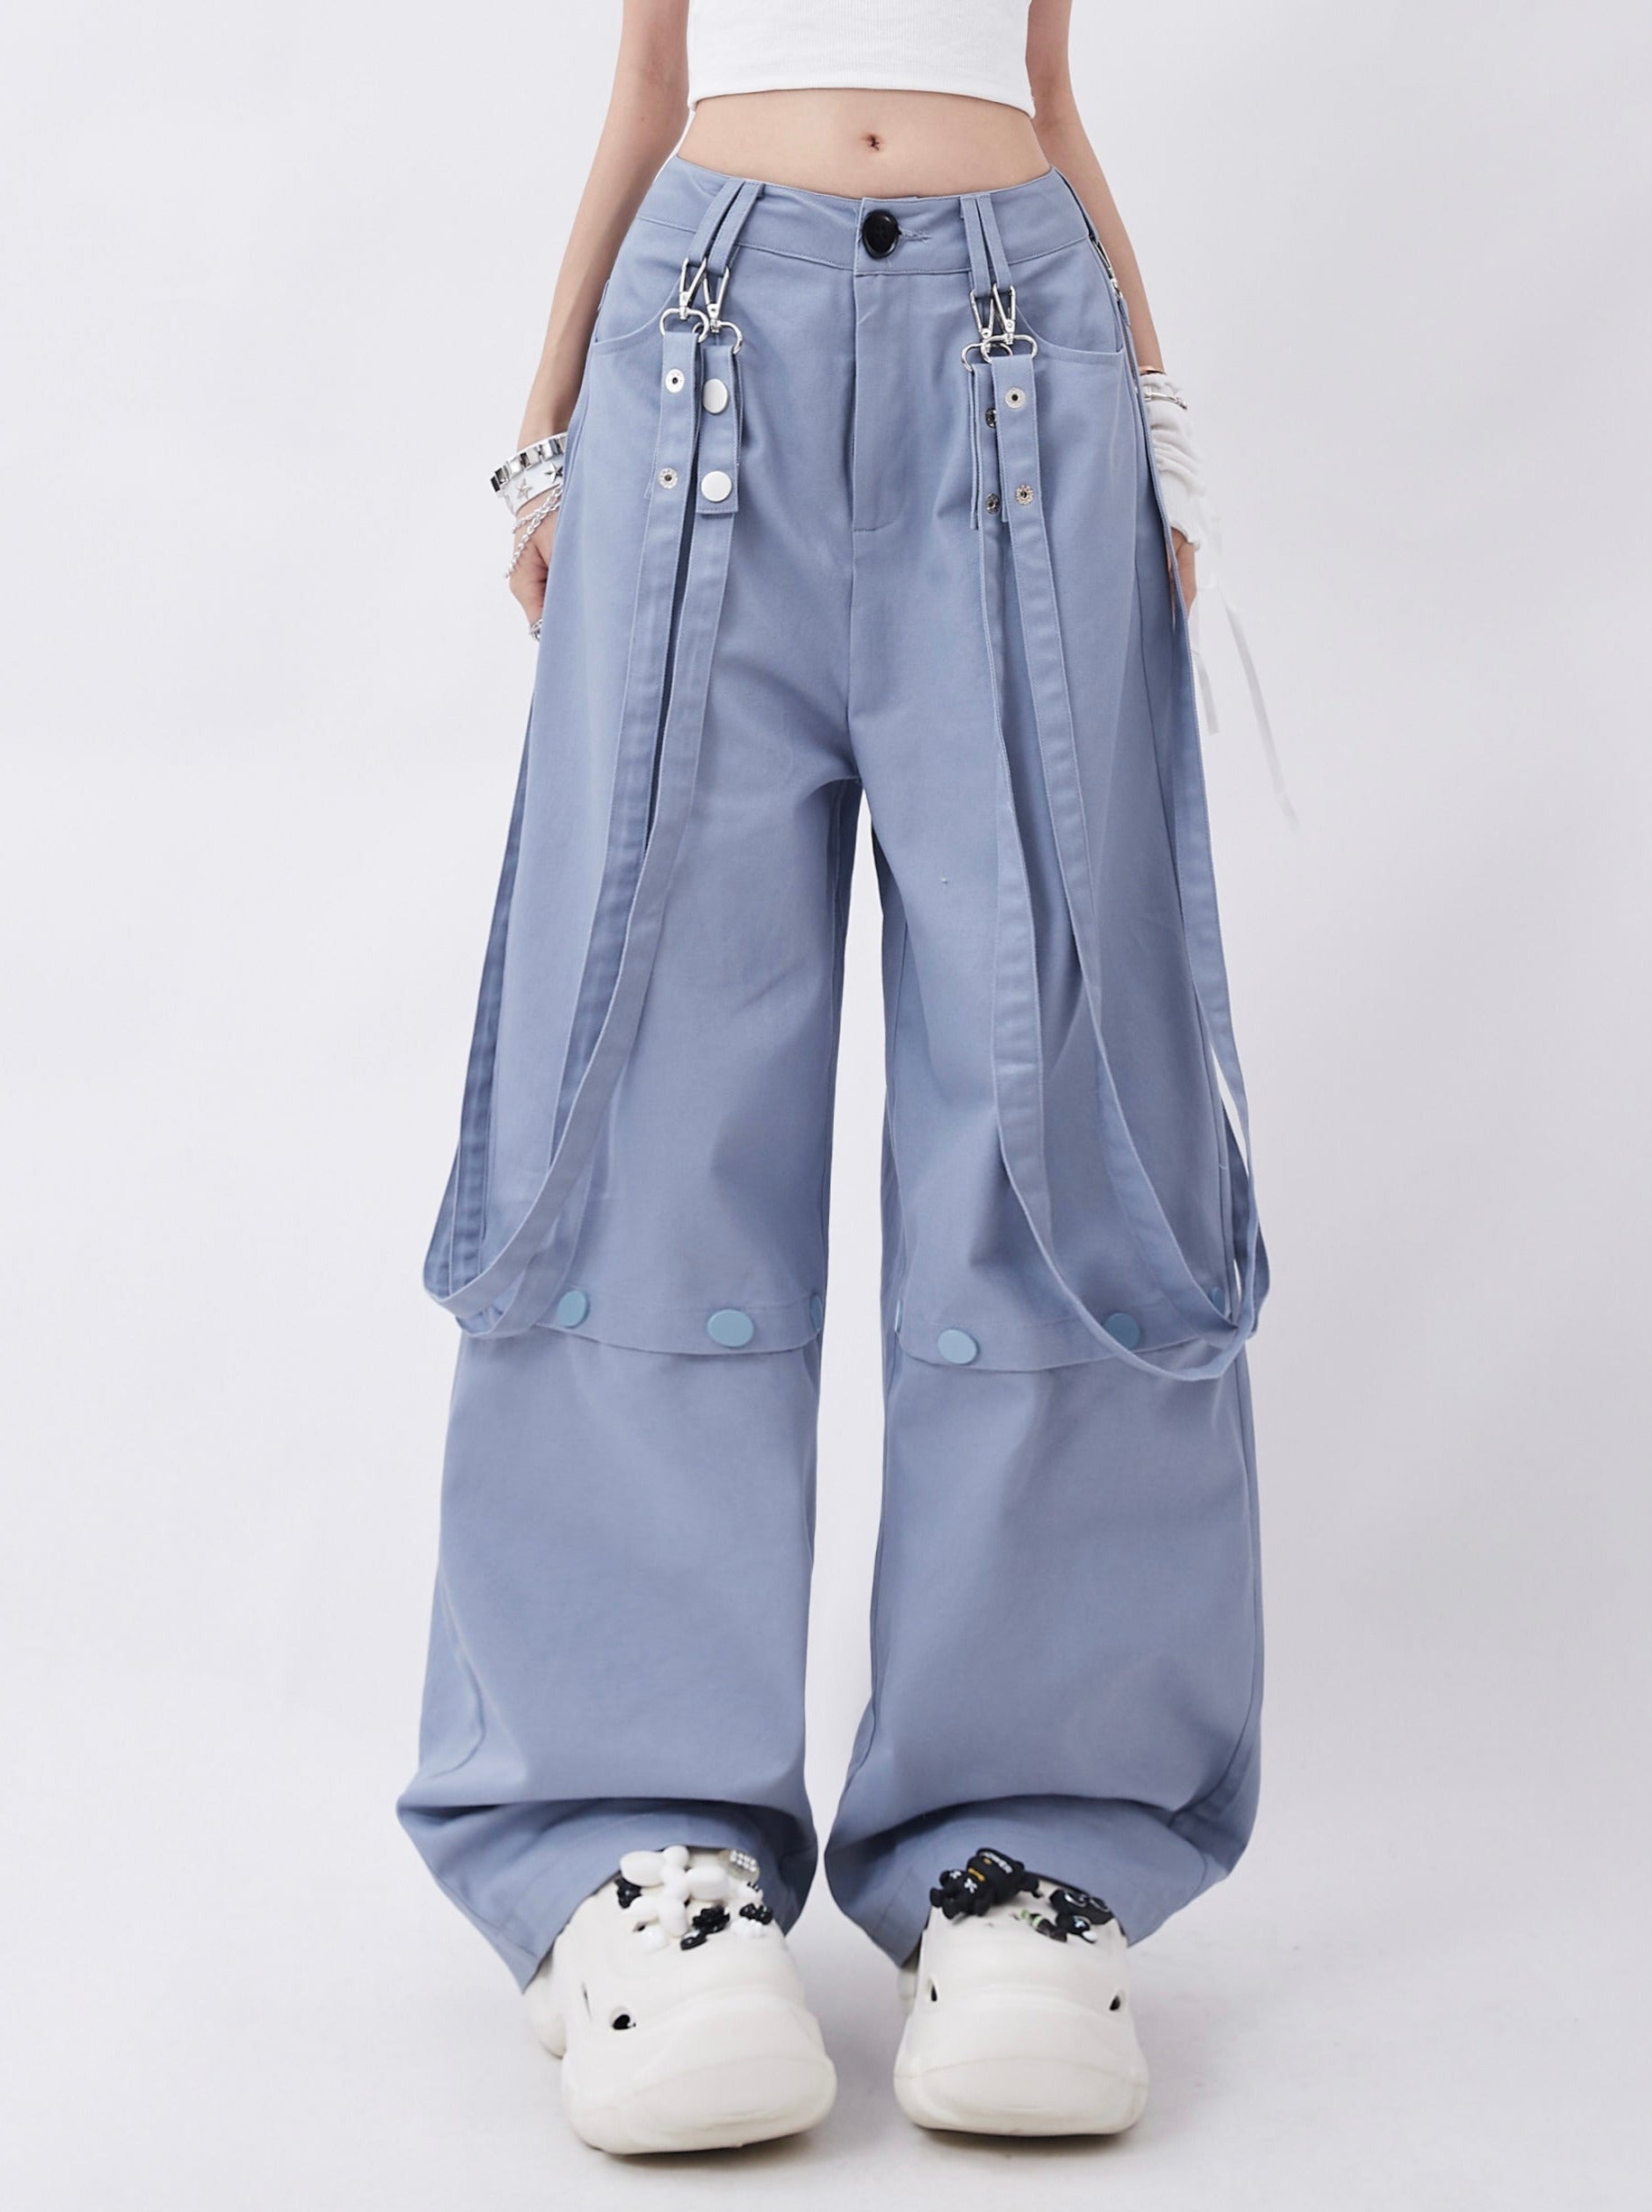 Open Flared Denim Pants Pearl Stretches Trousers For Kids Girl Slim Jeans  Spring  eBay